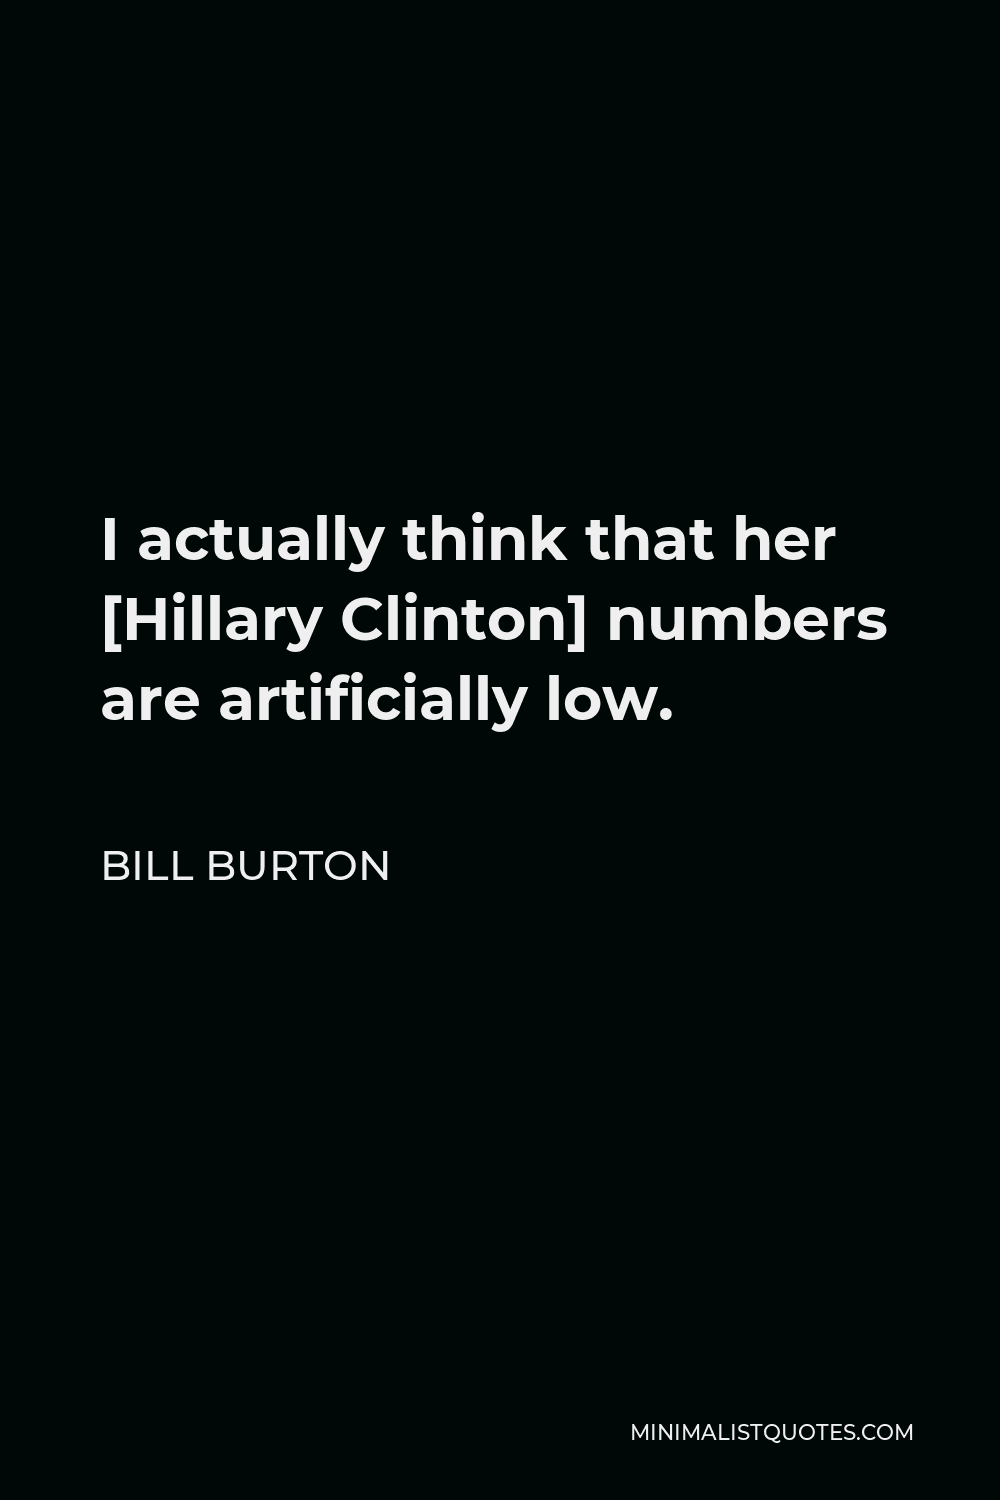 Bill Burton Quote - I actually think that her [Hillary Clinton] numbers are artificially low.